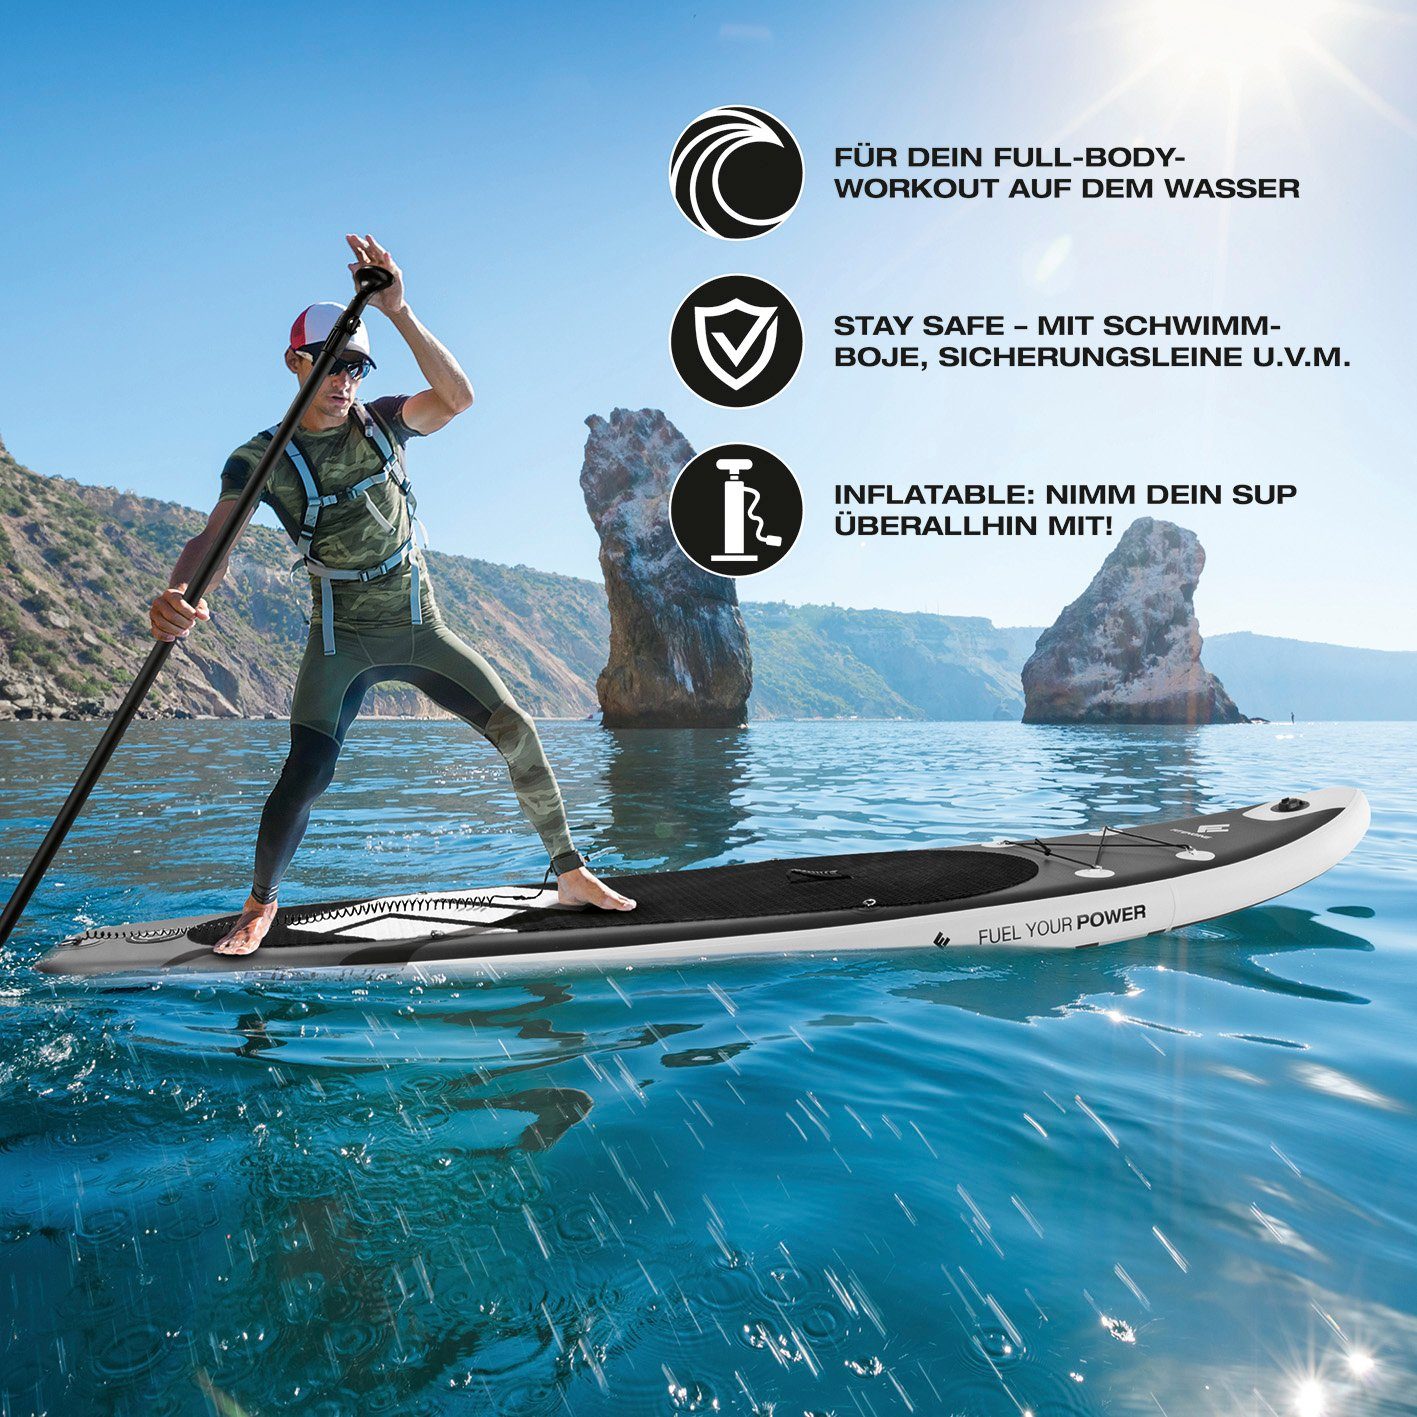 Sport Boards FitEngine Inflatable SUP-Board Stand Up Paddle Board inkl. Zubehör, Groß und Stabil 325 cm, 140 kg, SUP Board aufbl